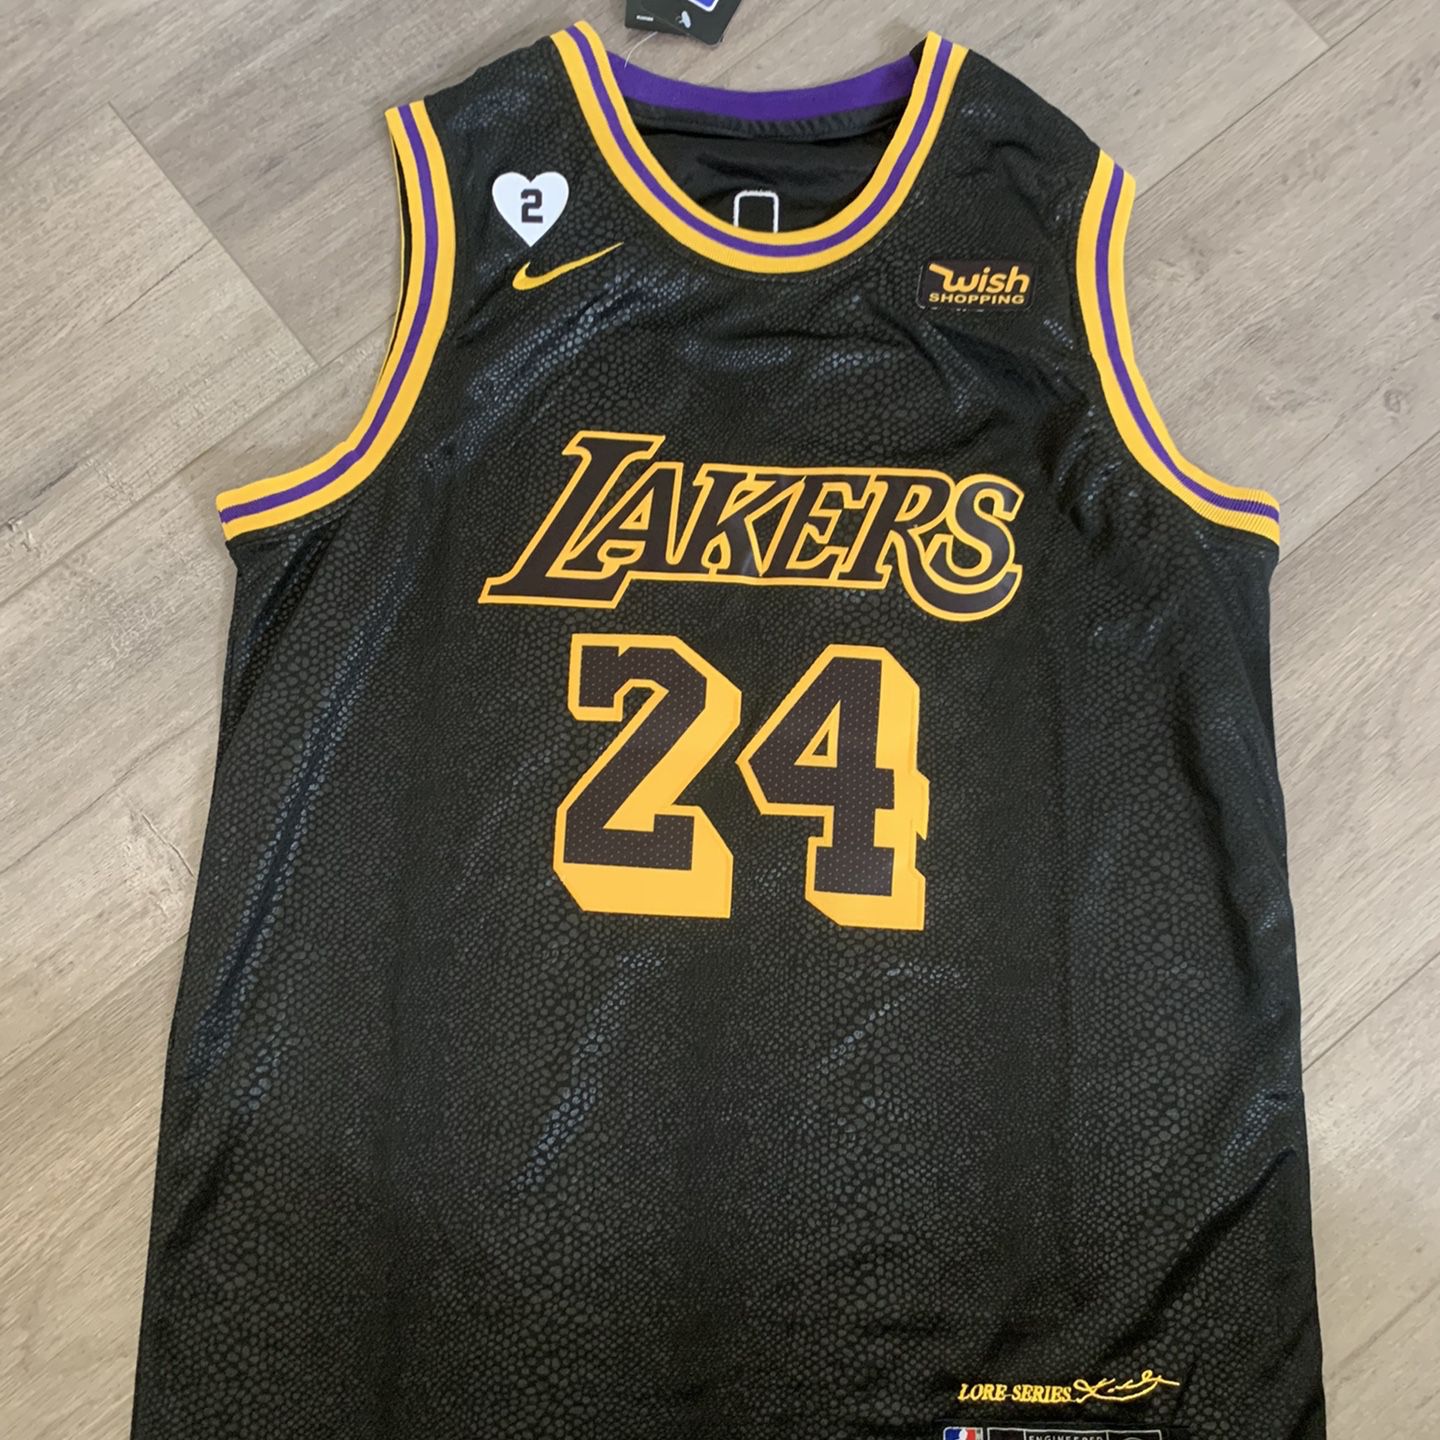 Kobe Bryant Lakers NBA Jersey for Sale in Lakewood, CA - OfferUp